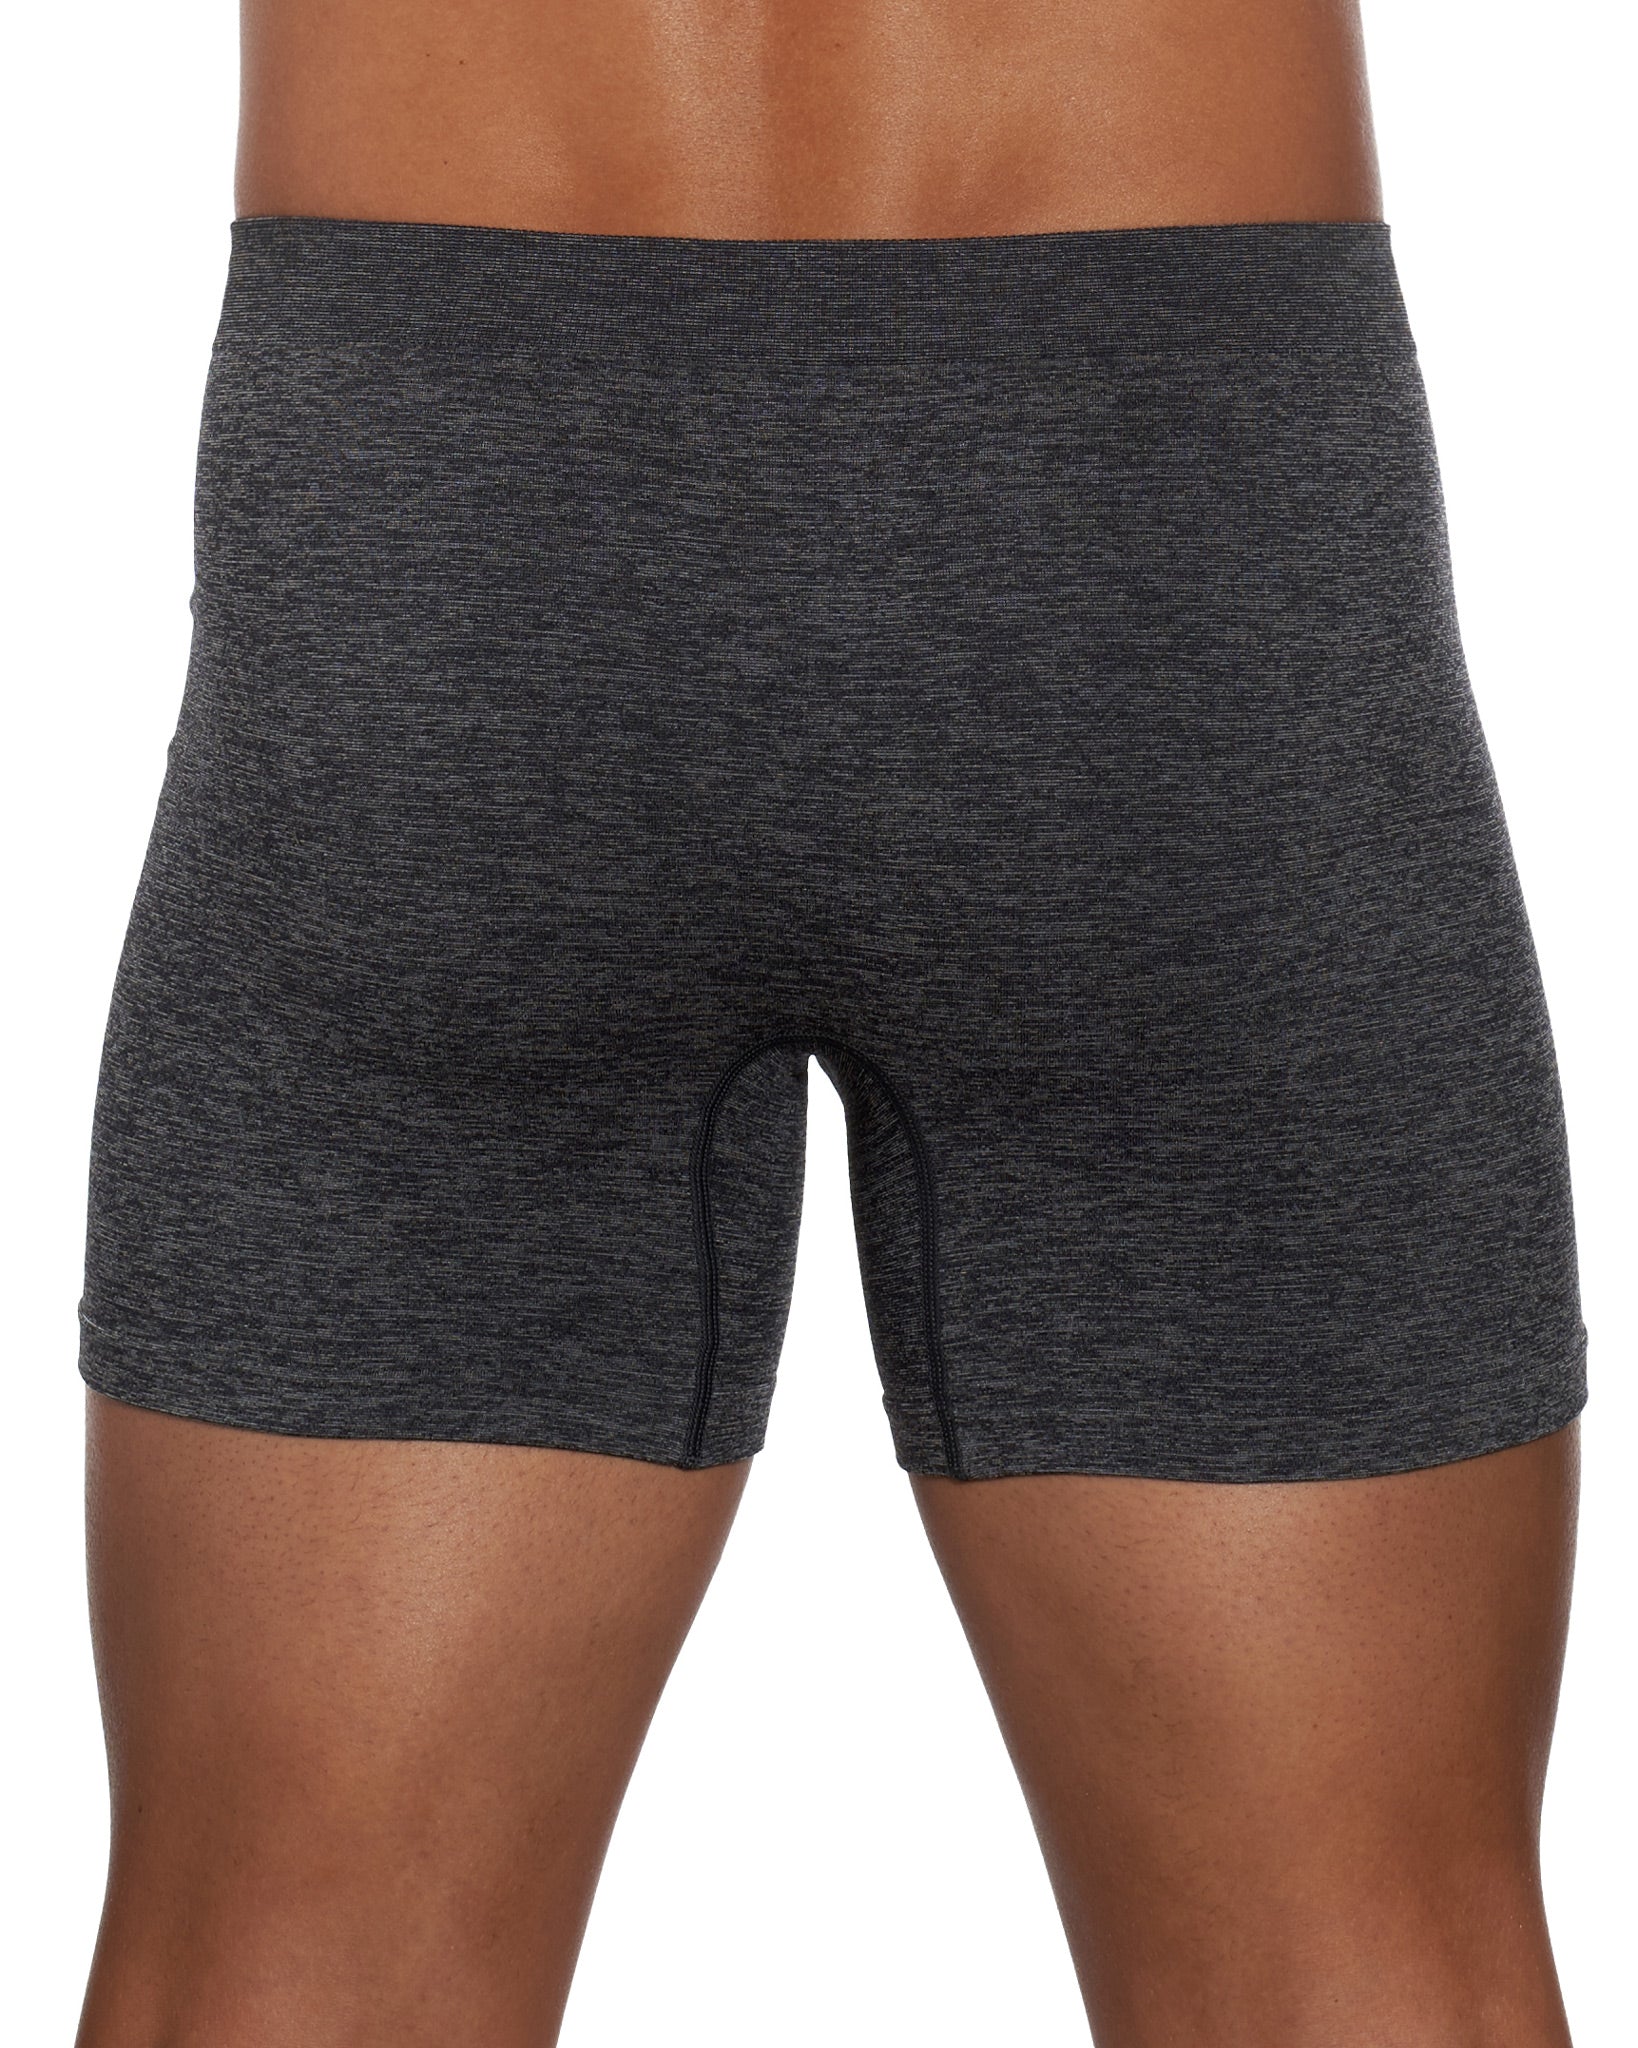 Kind words for the super soft SAM boxers with seamless feel